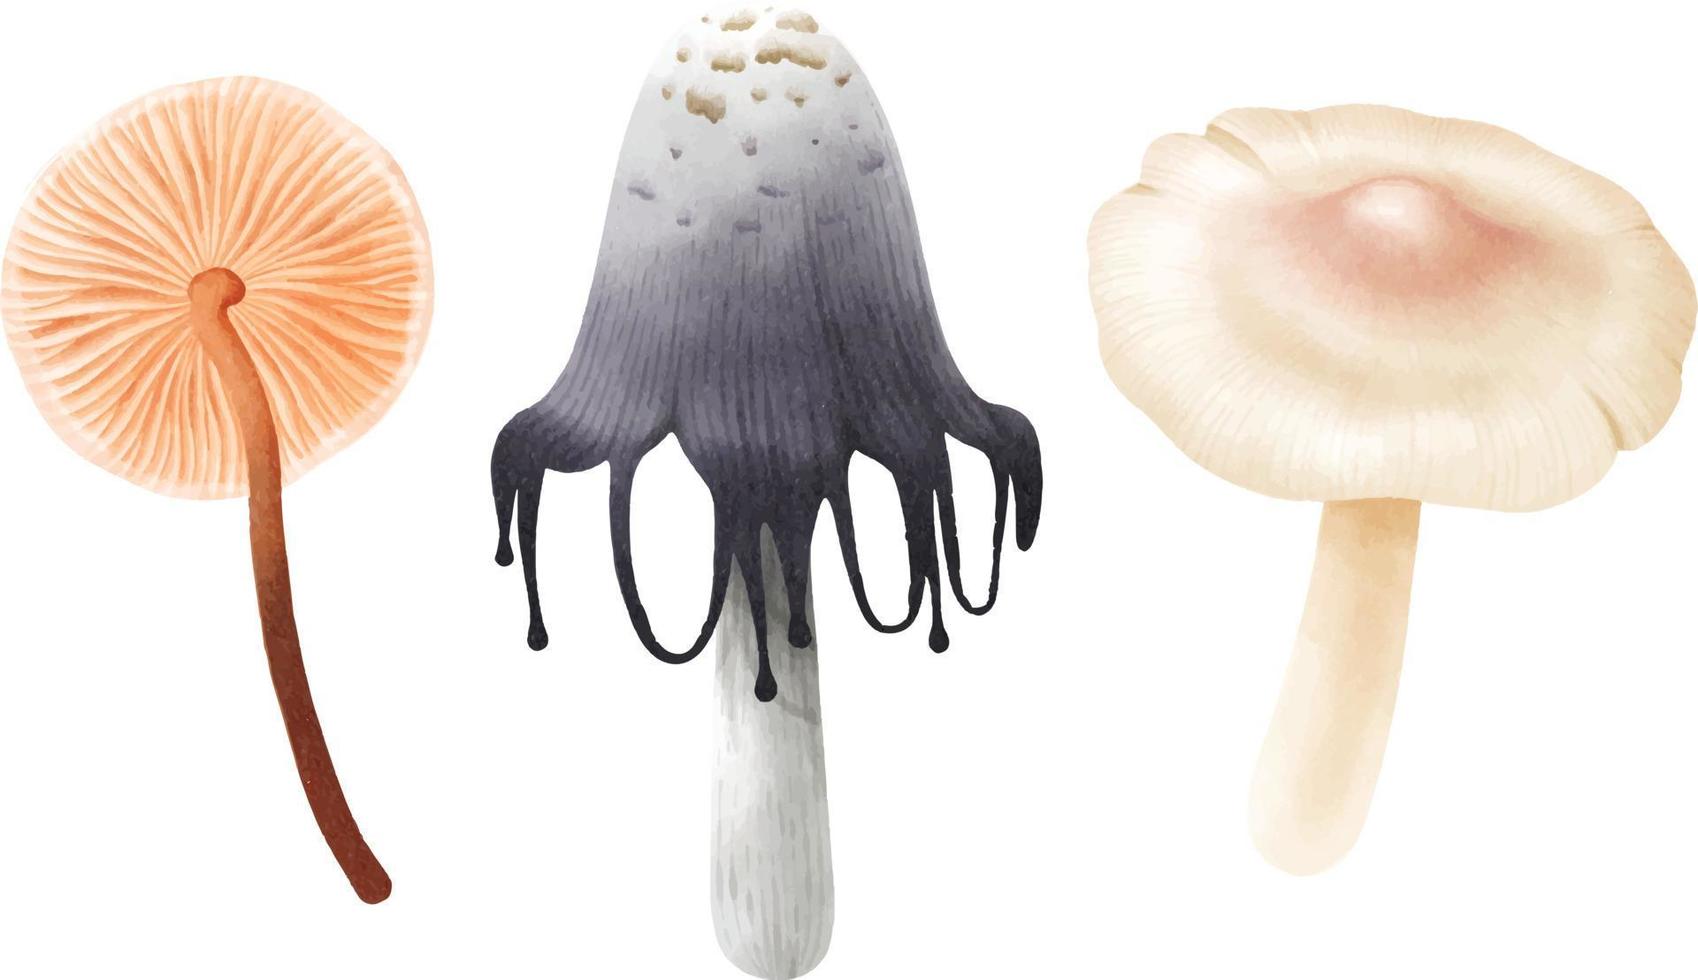 Mushroom illustration watercolor style collection vector